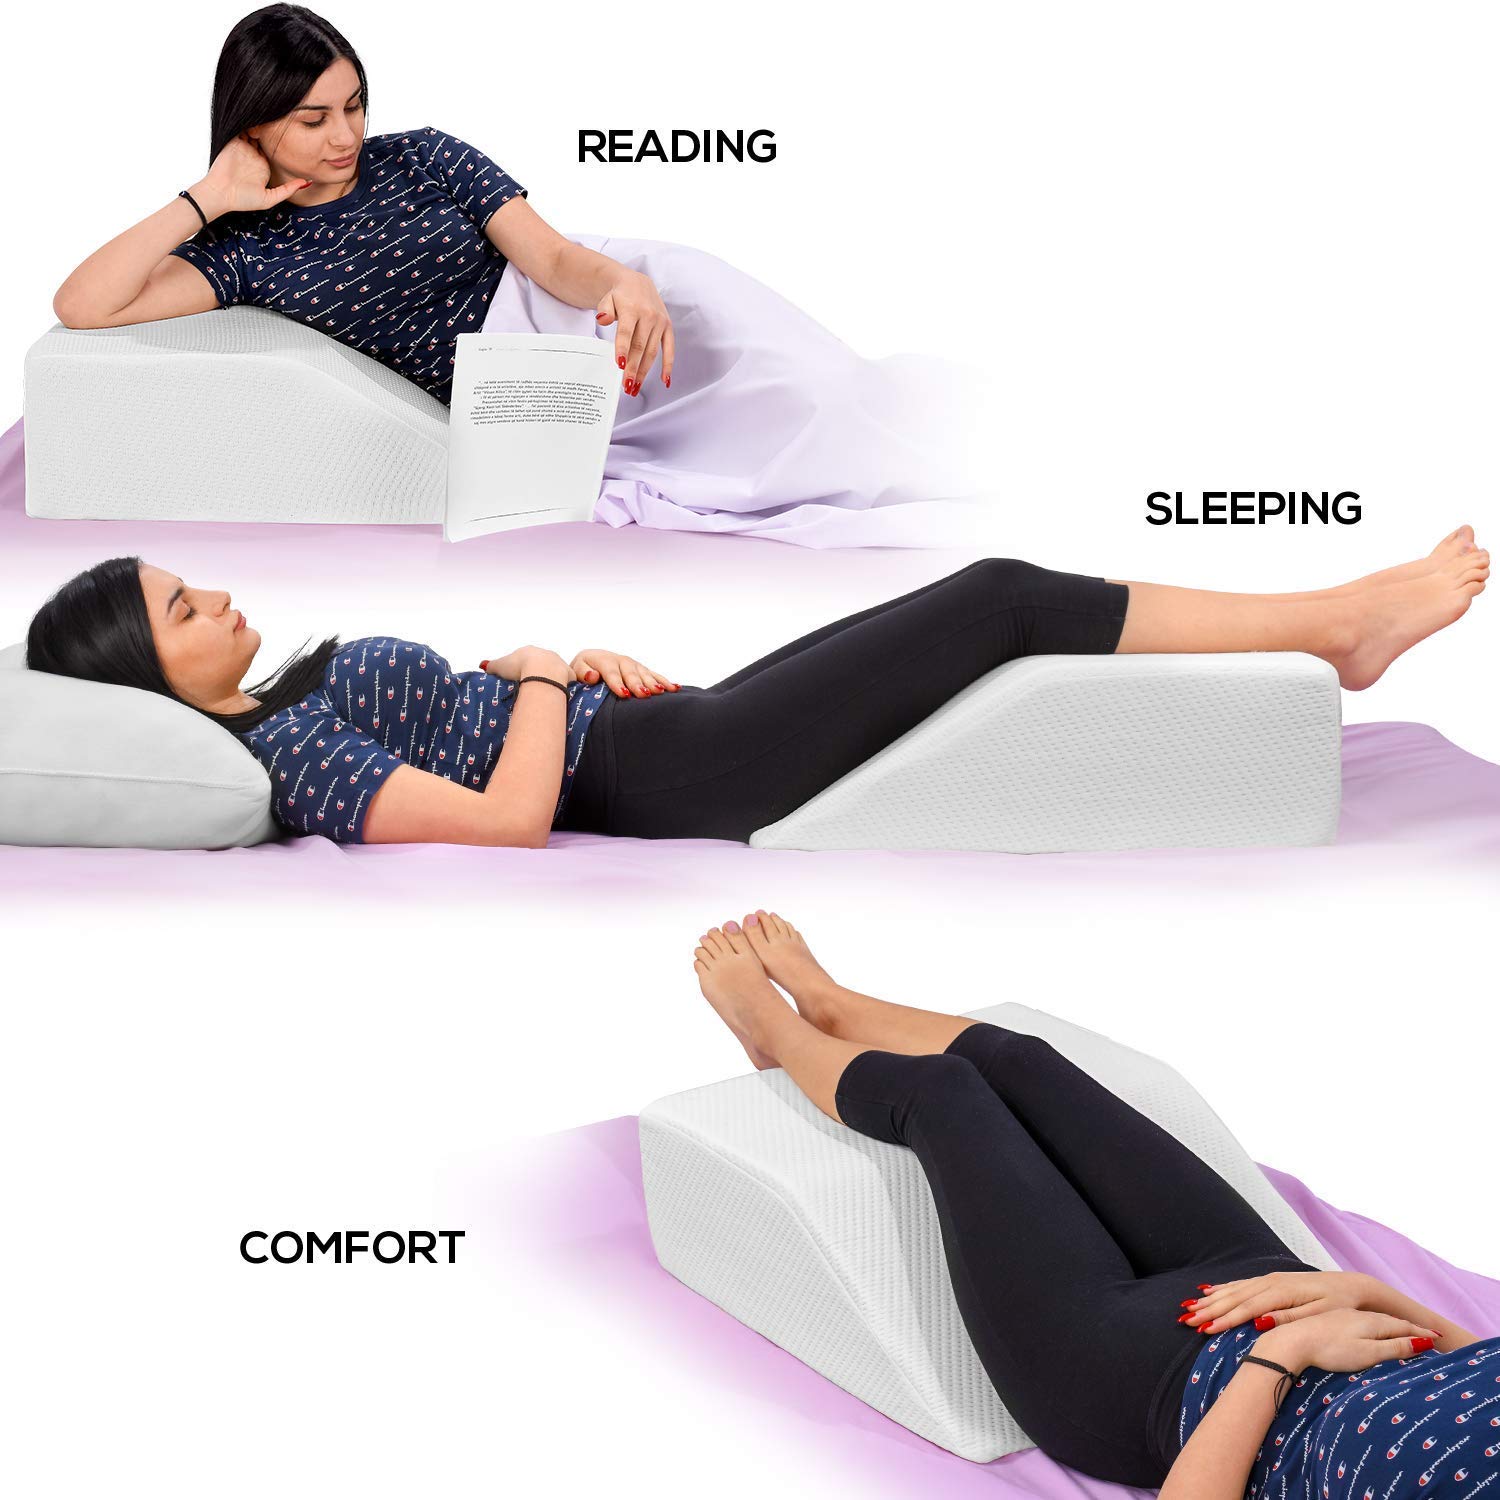 Leg Elevation Pillow and Bed Wedge Pillow Bundle - Memory Foam Top- Sleeping, Reading, Relaxing - Pain Relief for Hips, Back, Neck, Legs and Knees - For Snoring, Acid Reflux, Swelling - Washable Cover